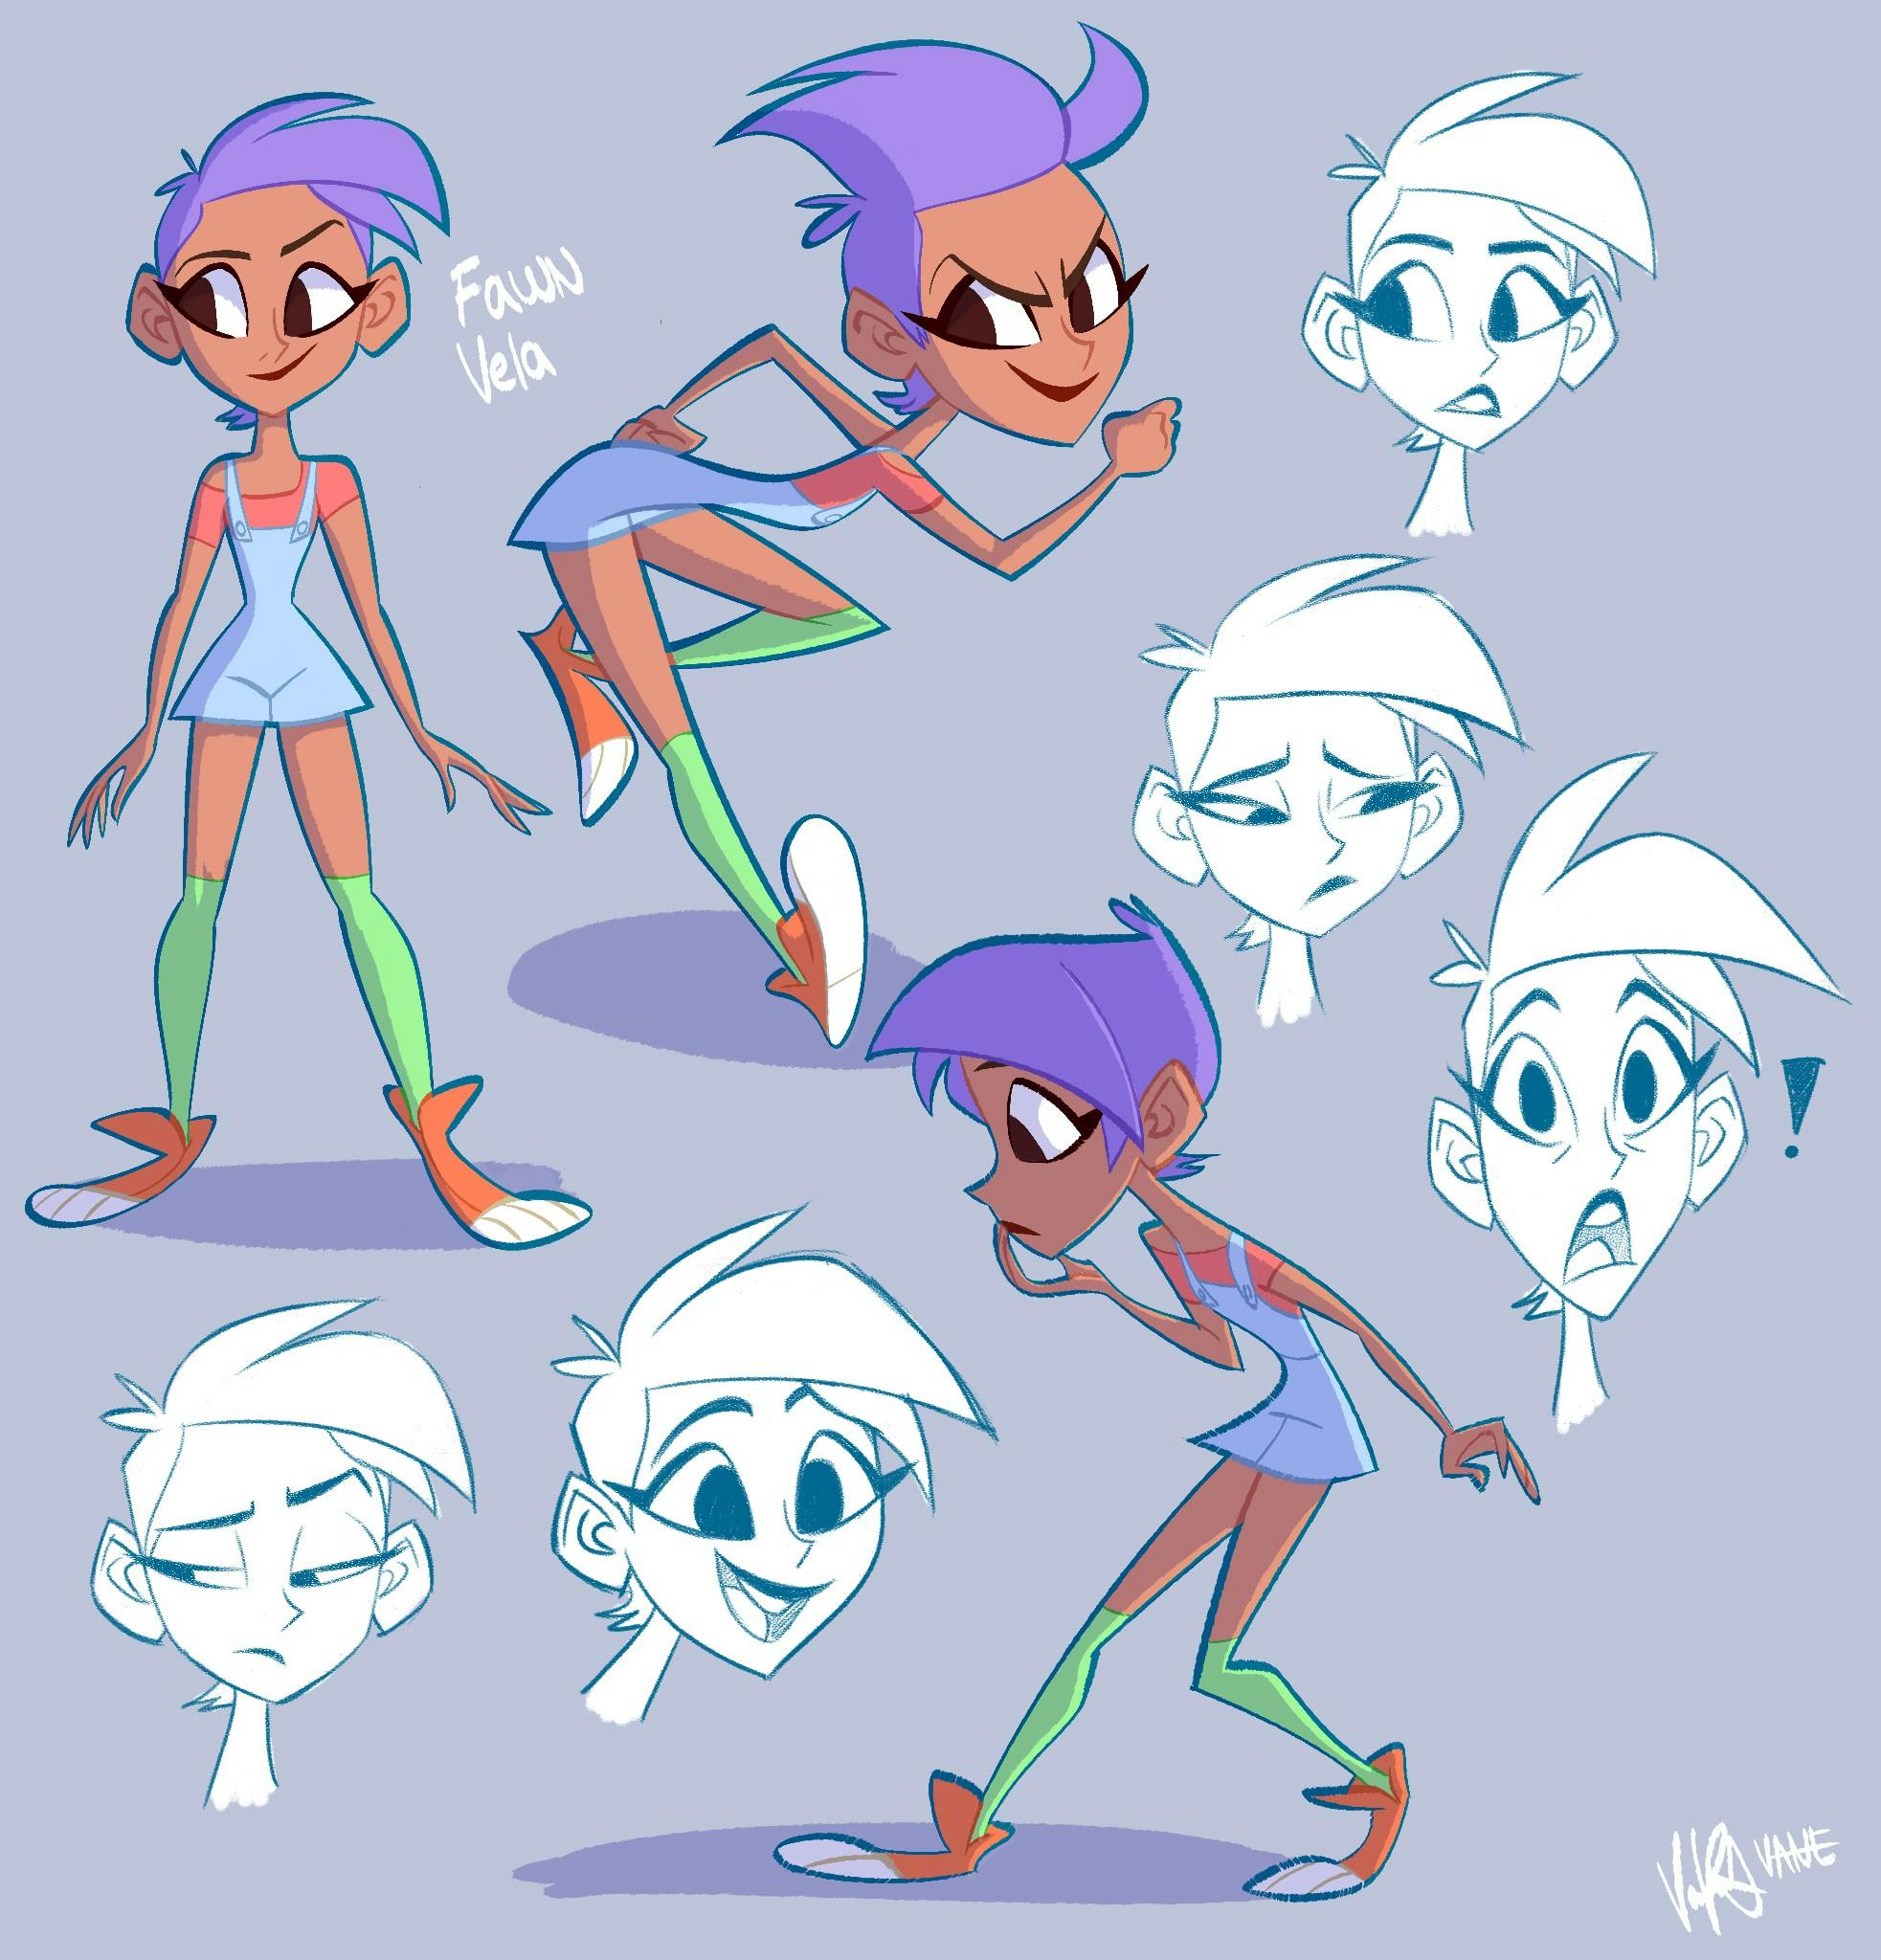 Character study of Fawn Vela